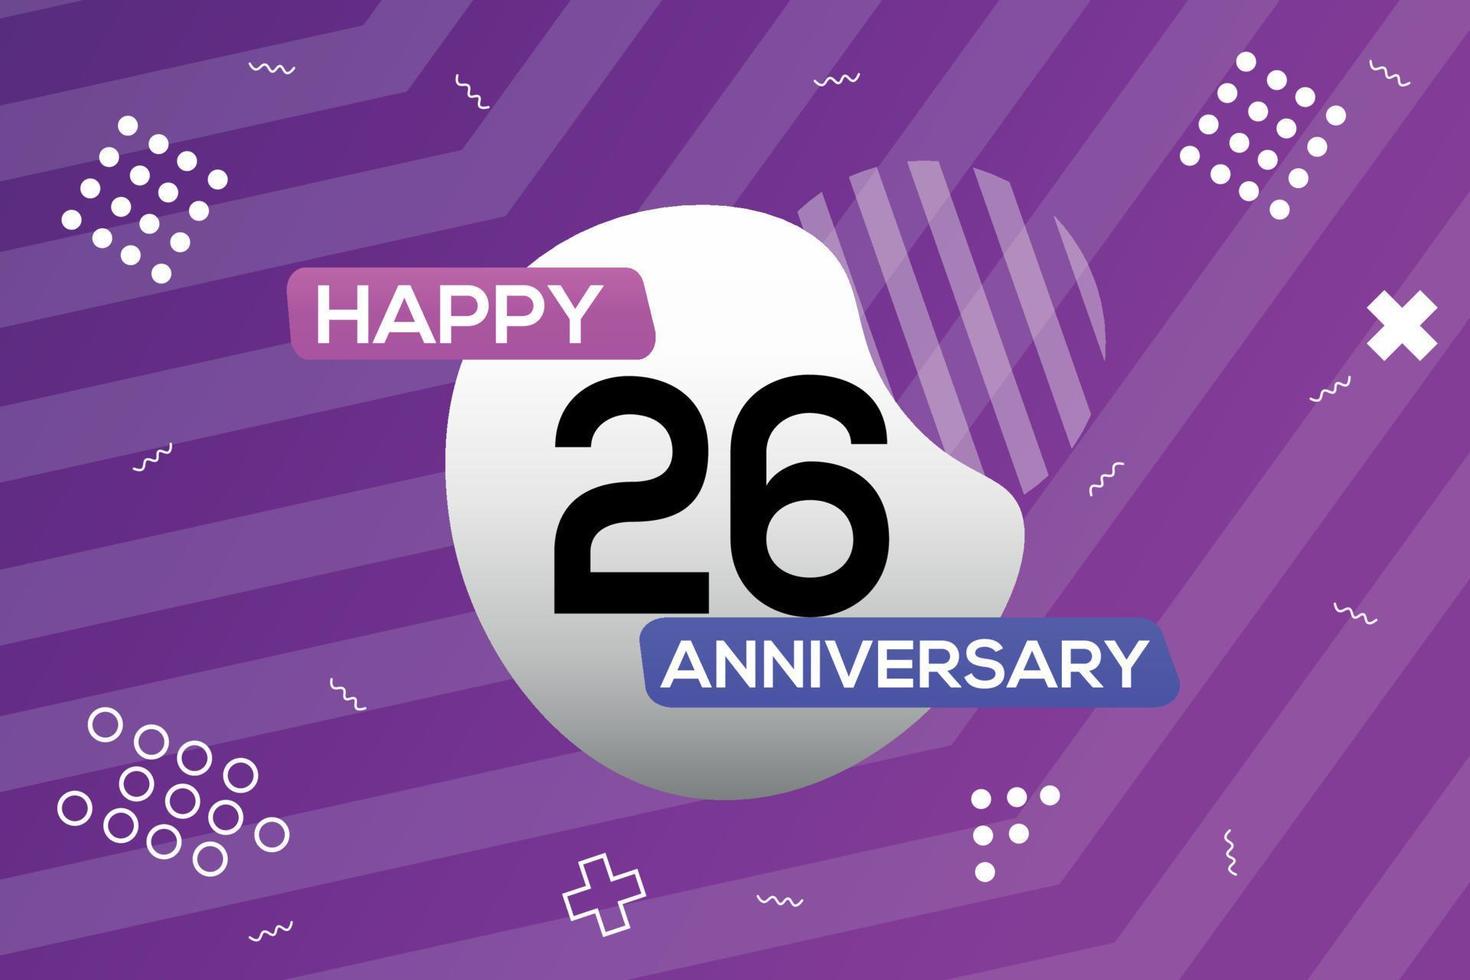 26th year anniversary logo vector design anniversary celebration with colorful geometric shapes abstract illustration